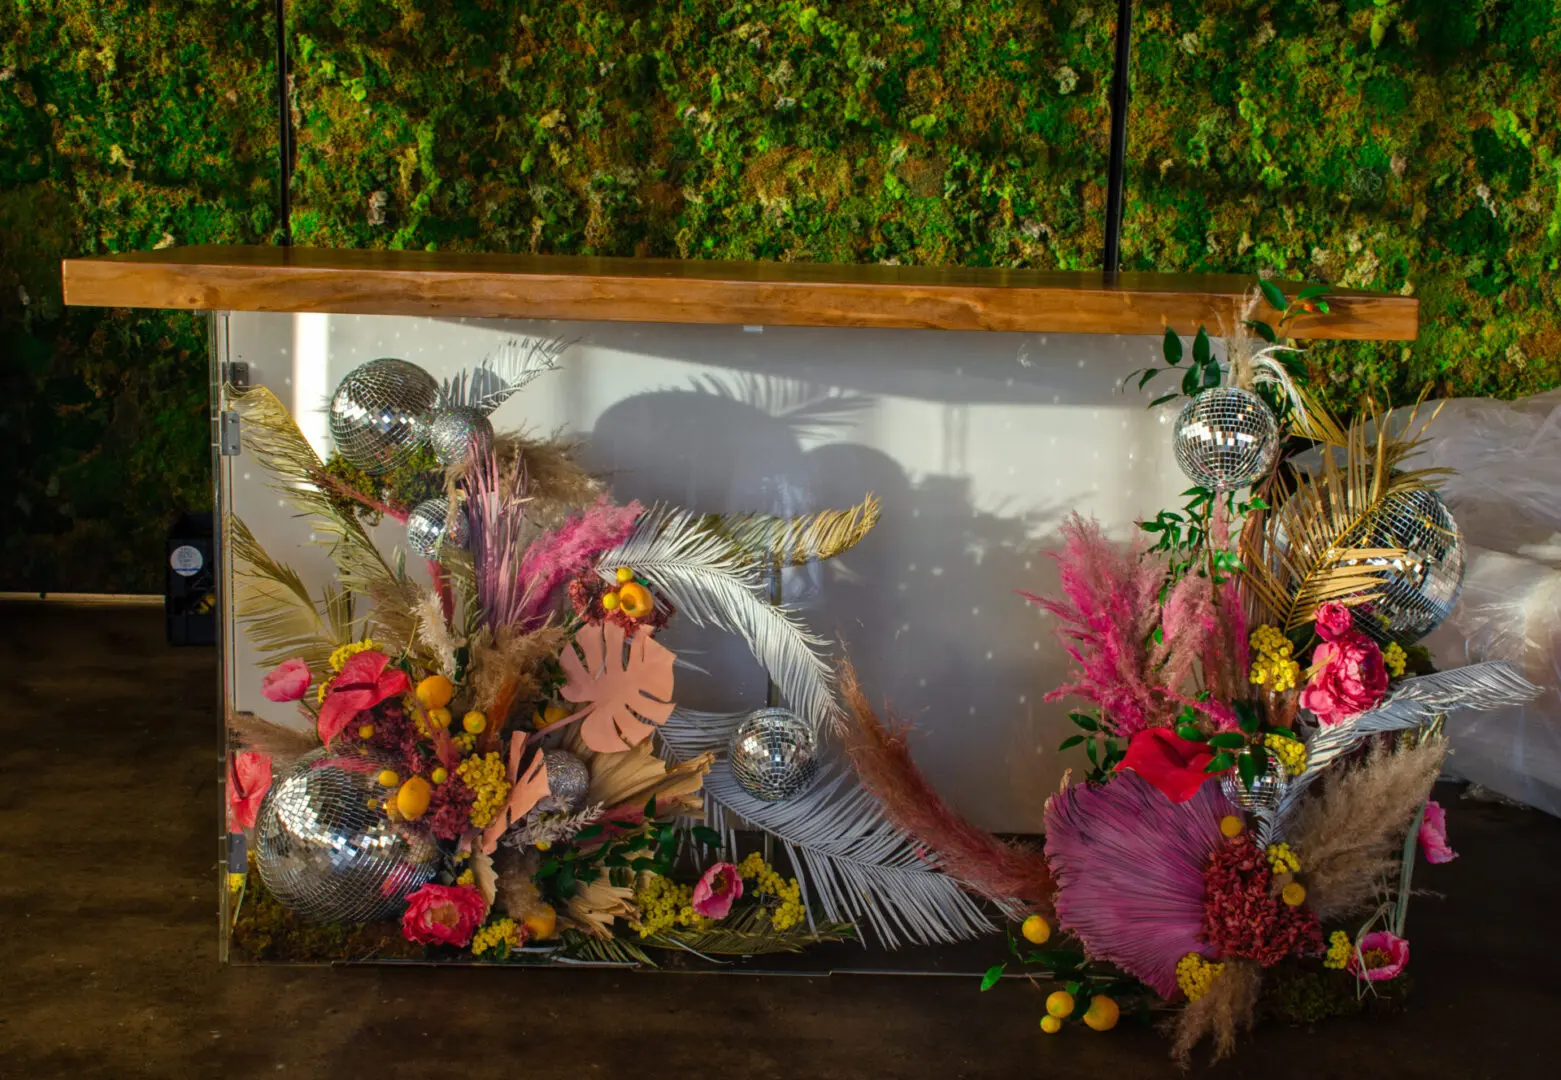 A decorative bar front adorned with colorful flowers, feathers, and disco balls, set against a backdrop of a greenery wall made for an event.